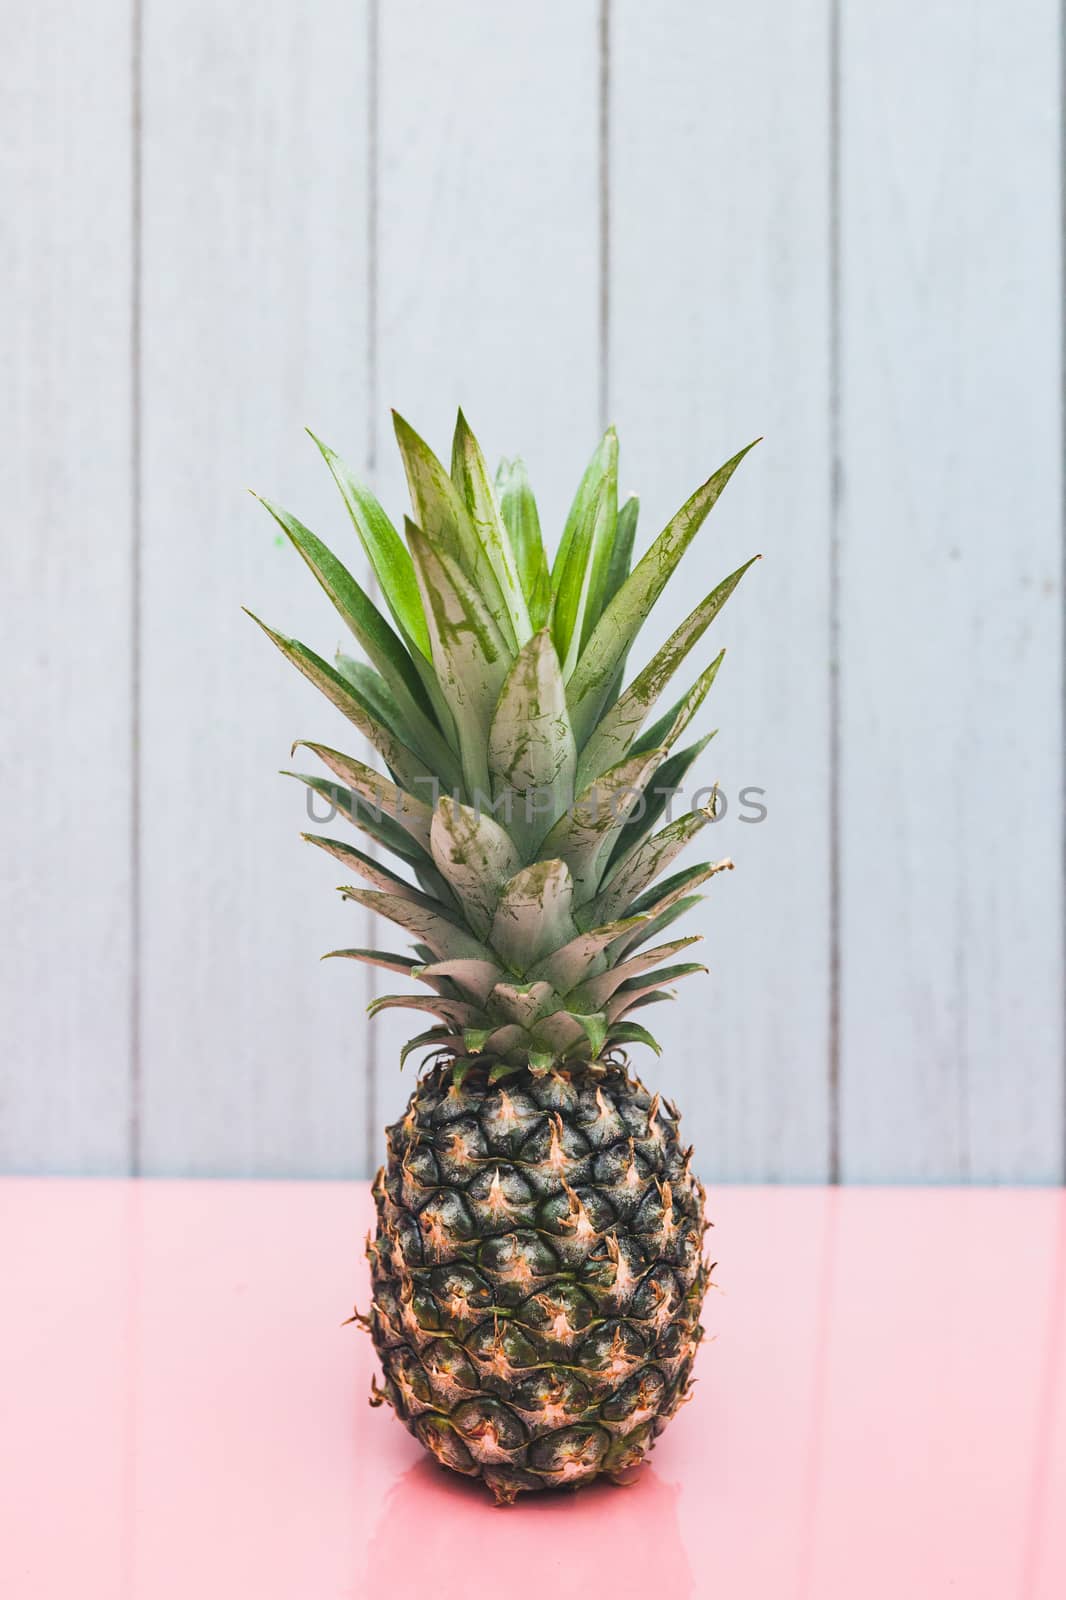 Pineapple on a blue pastel background .